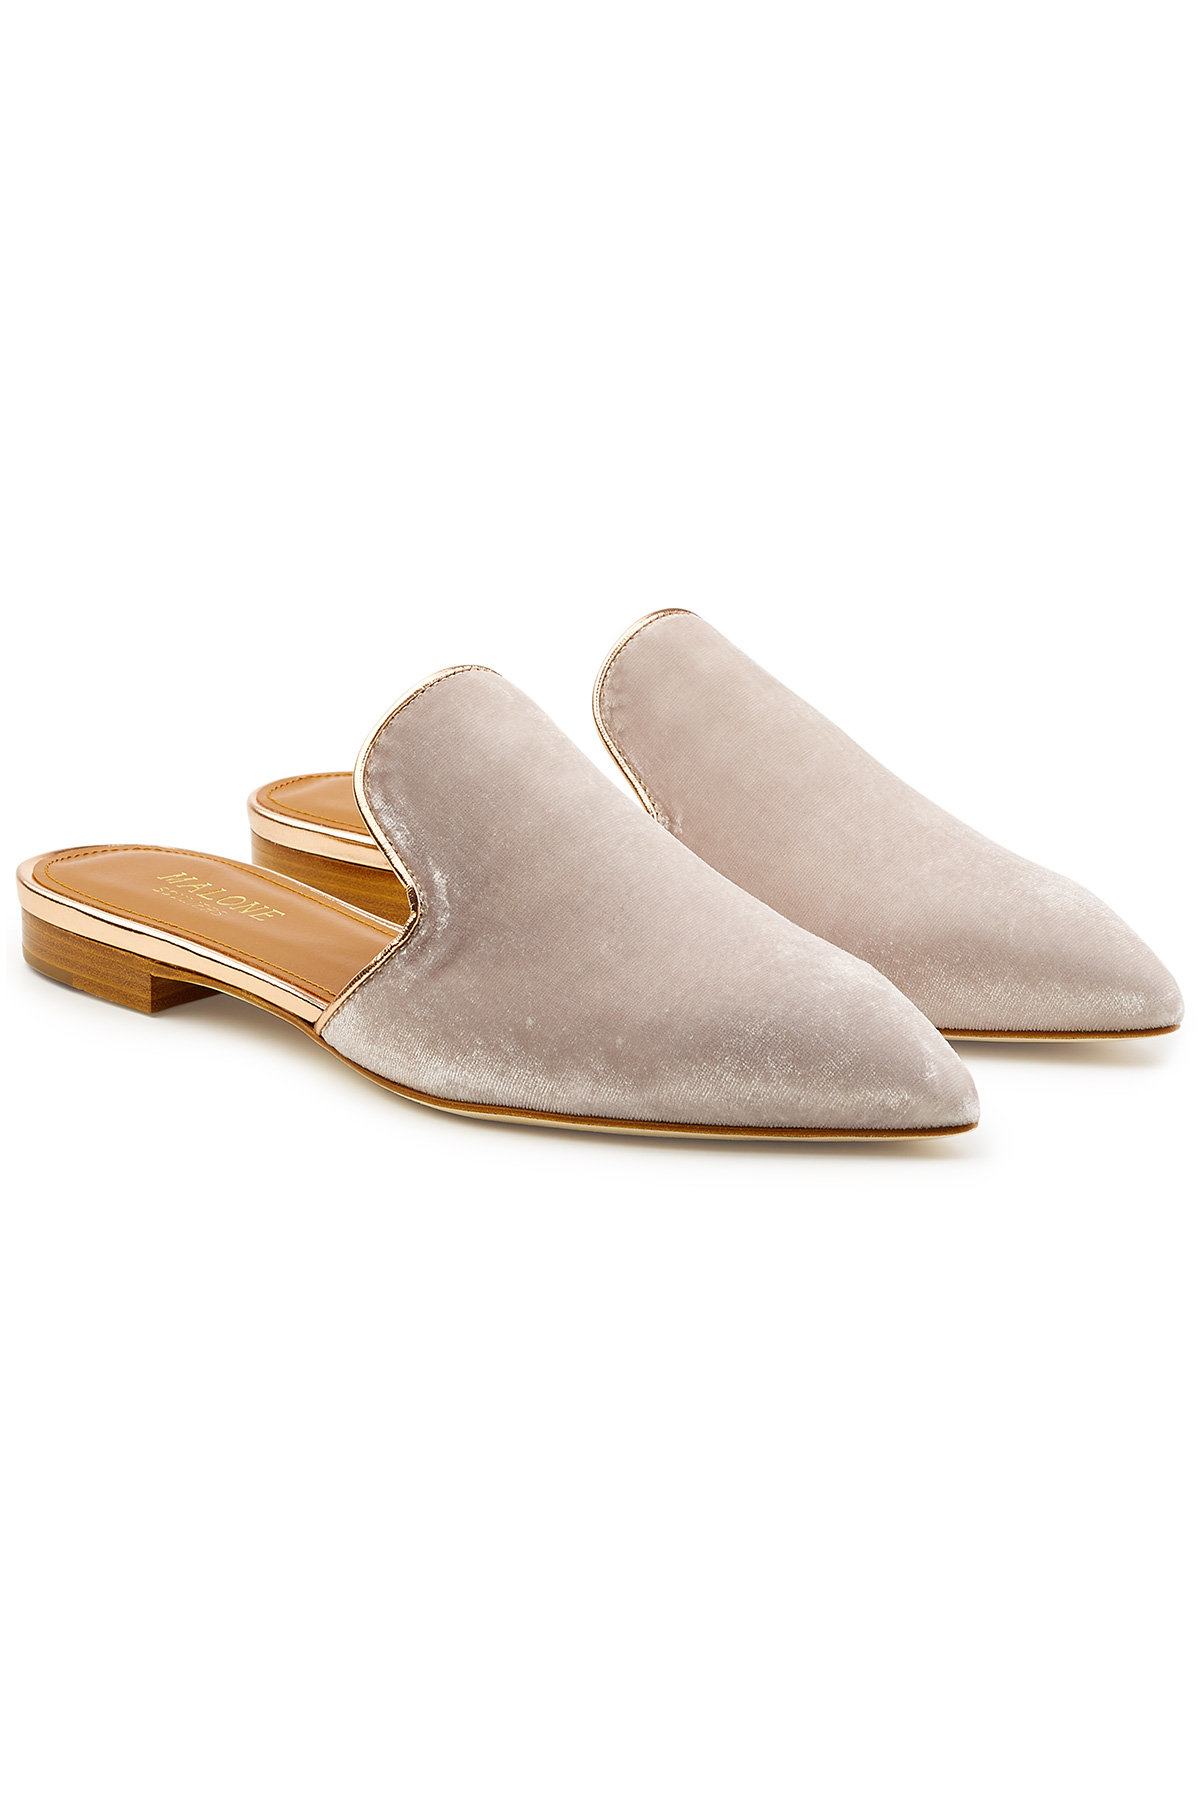 Velvet Slip-On Loafers by Malone Souliers